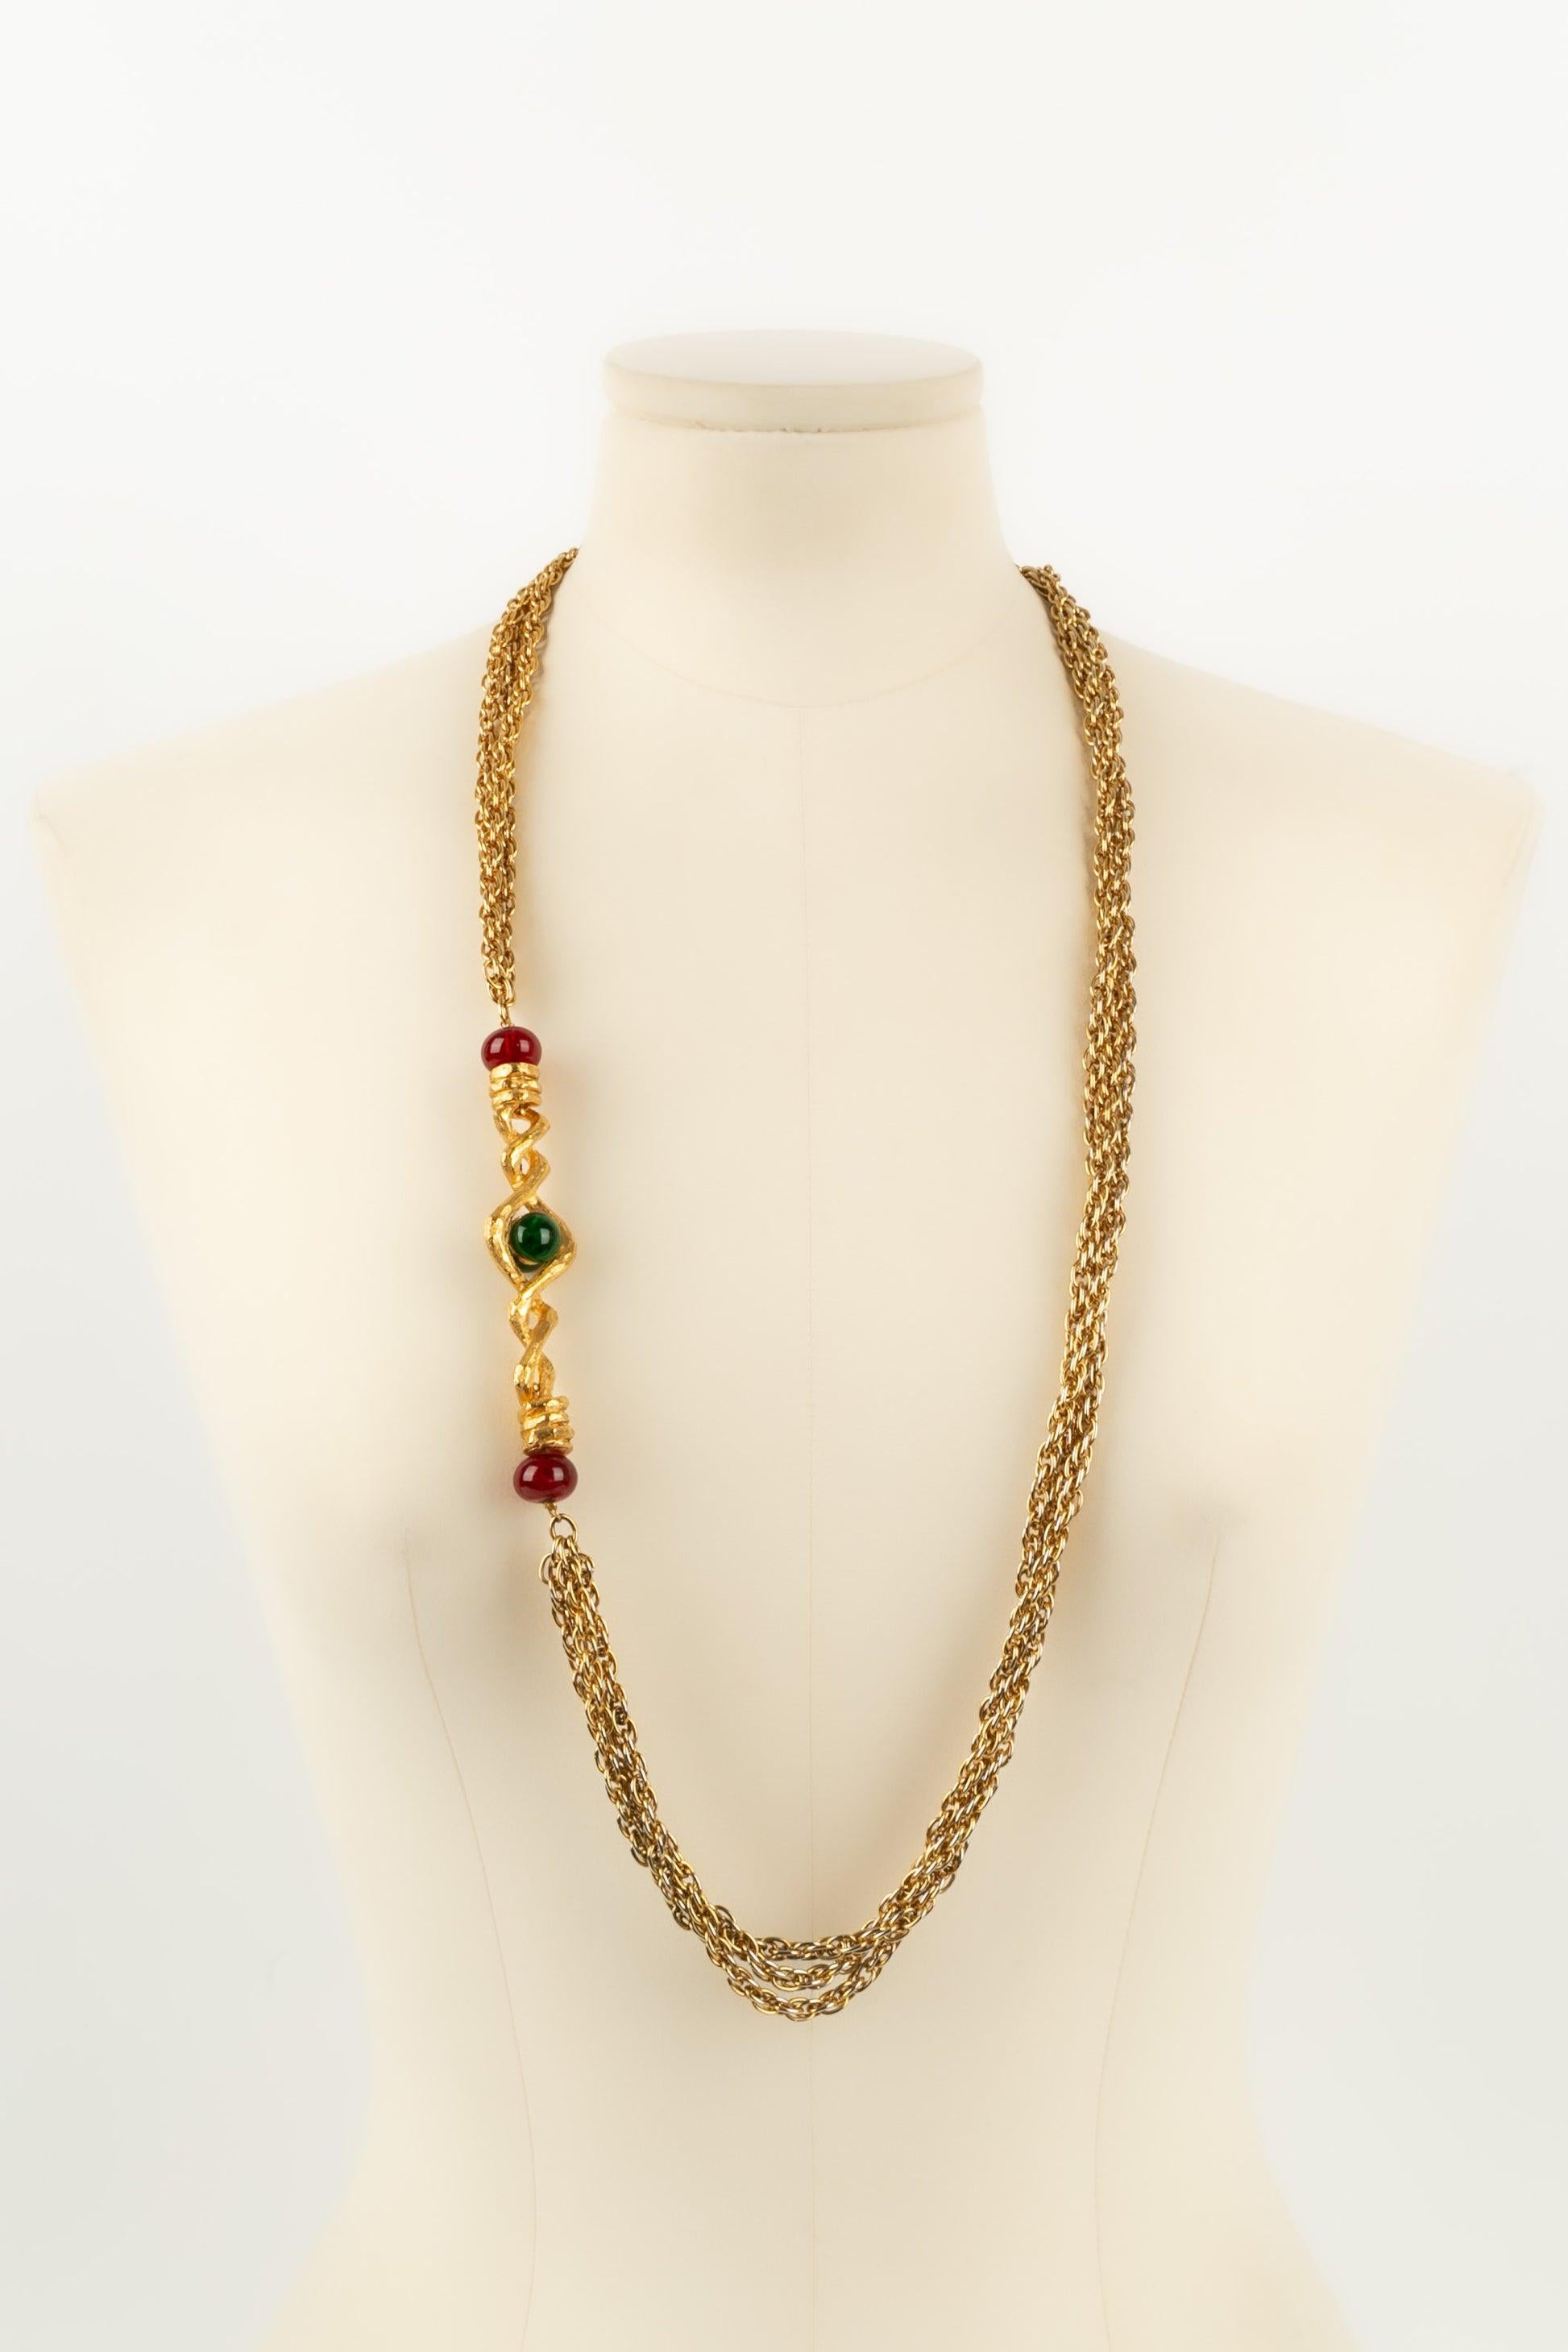 Chanel - (Made in France) Long necklace composed of thin chains in gold-plated metal and colored glass pearls.

Additional information:
Condition: Very good condition
Dimensions: Length: 88 cm

Seller Reference: CB181
